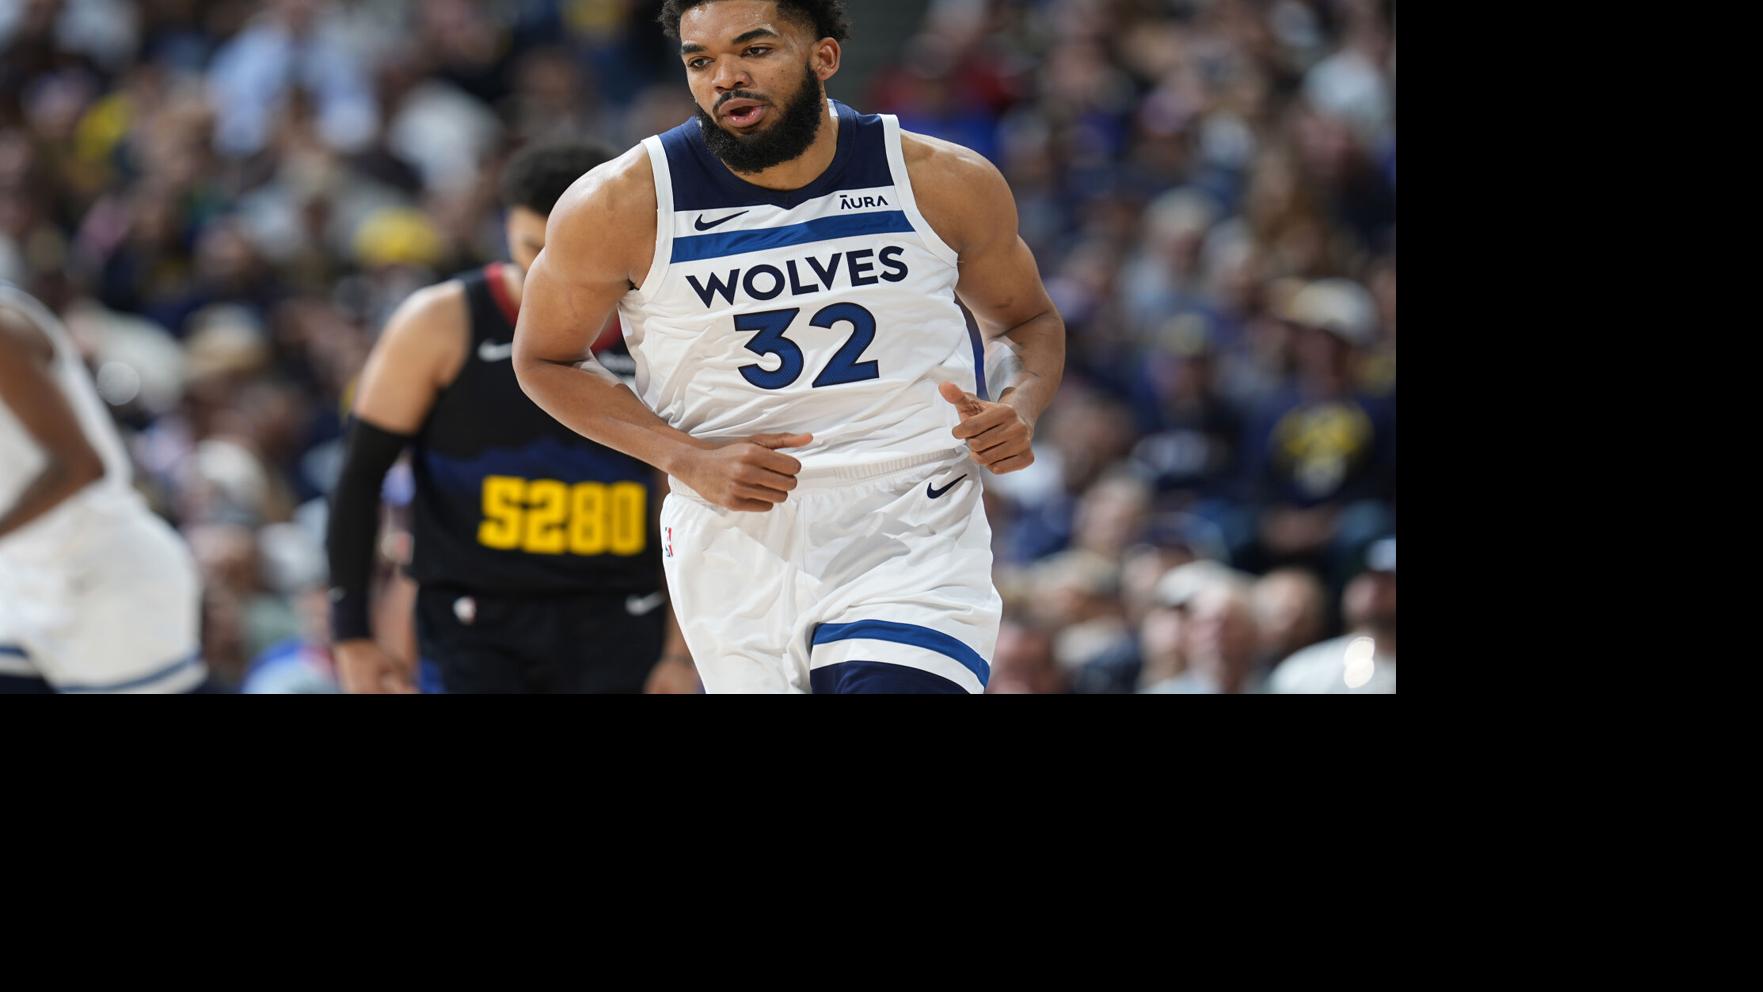 Karl-Anthony Towns of the Timberwolves receives the NBA's social justice award